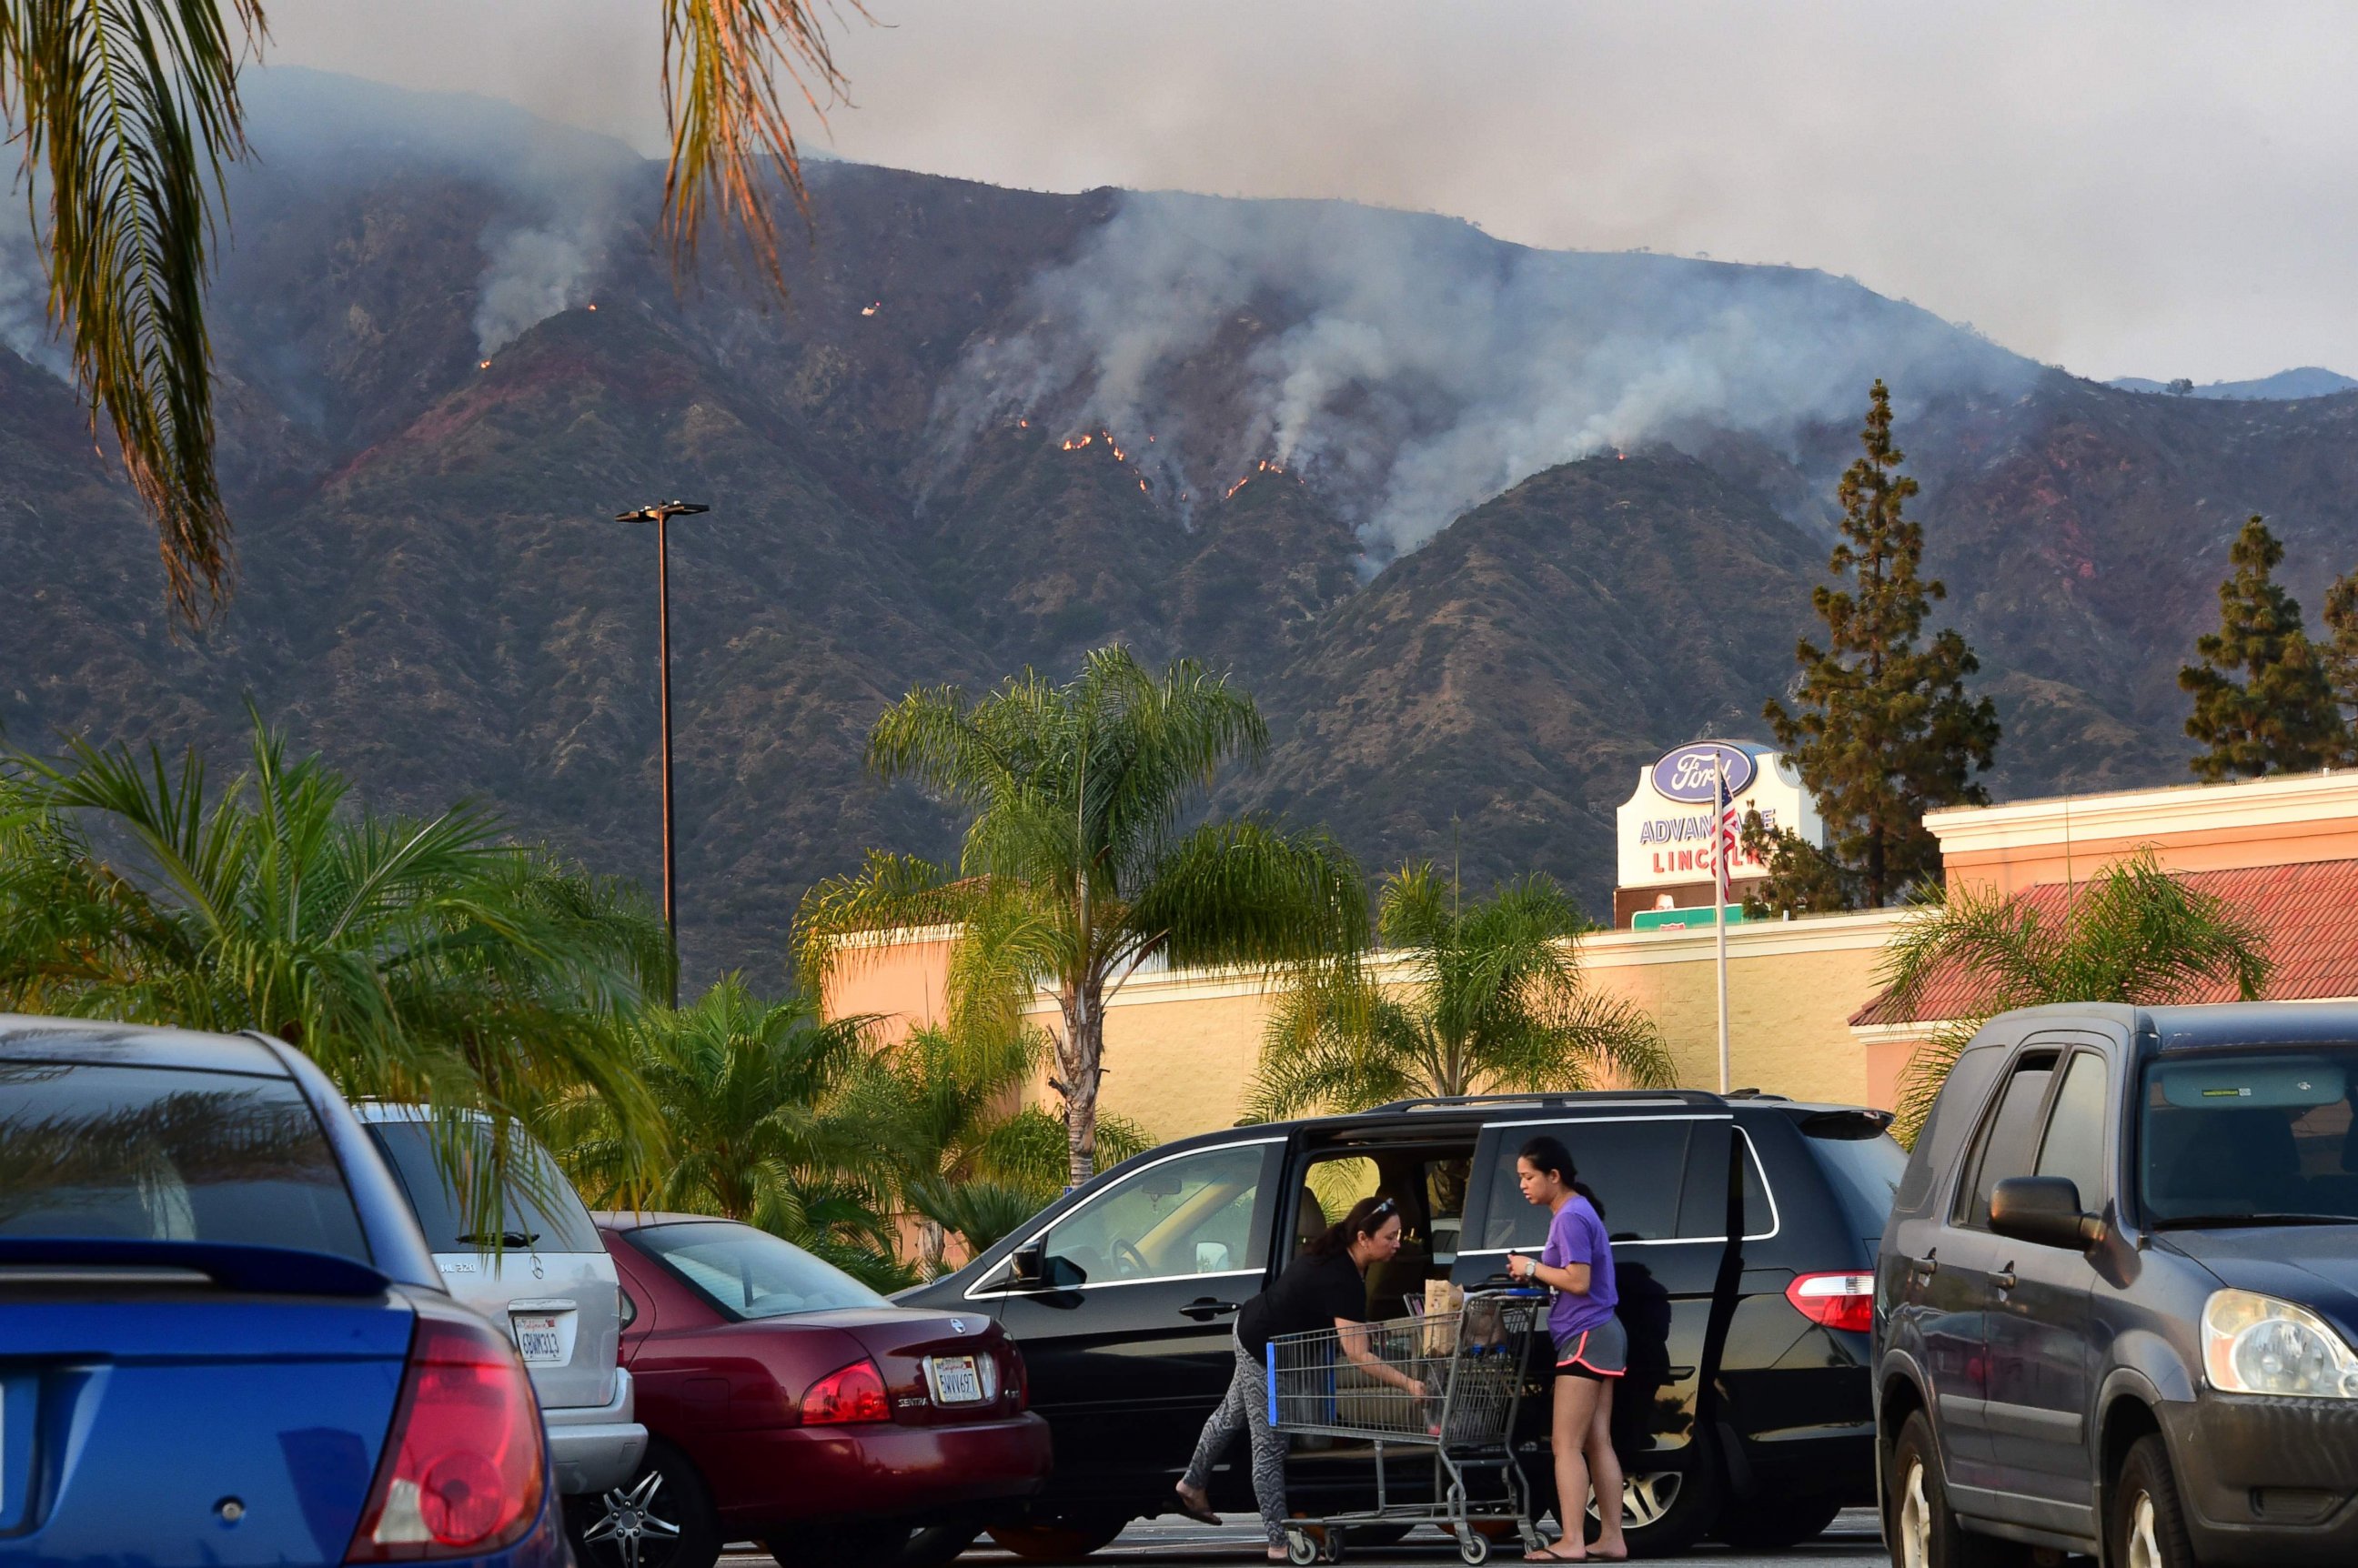 PHOTO: Shoppers load their car with the purchases against the backdrop of the smoke from the San Gabriel Complex Fire in the Angeles National Forest, near Duarte, Calif., on June 21, 2016.